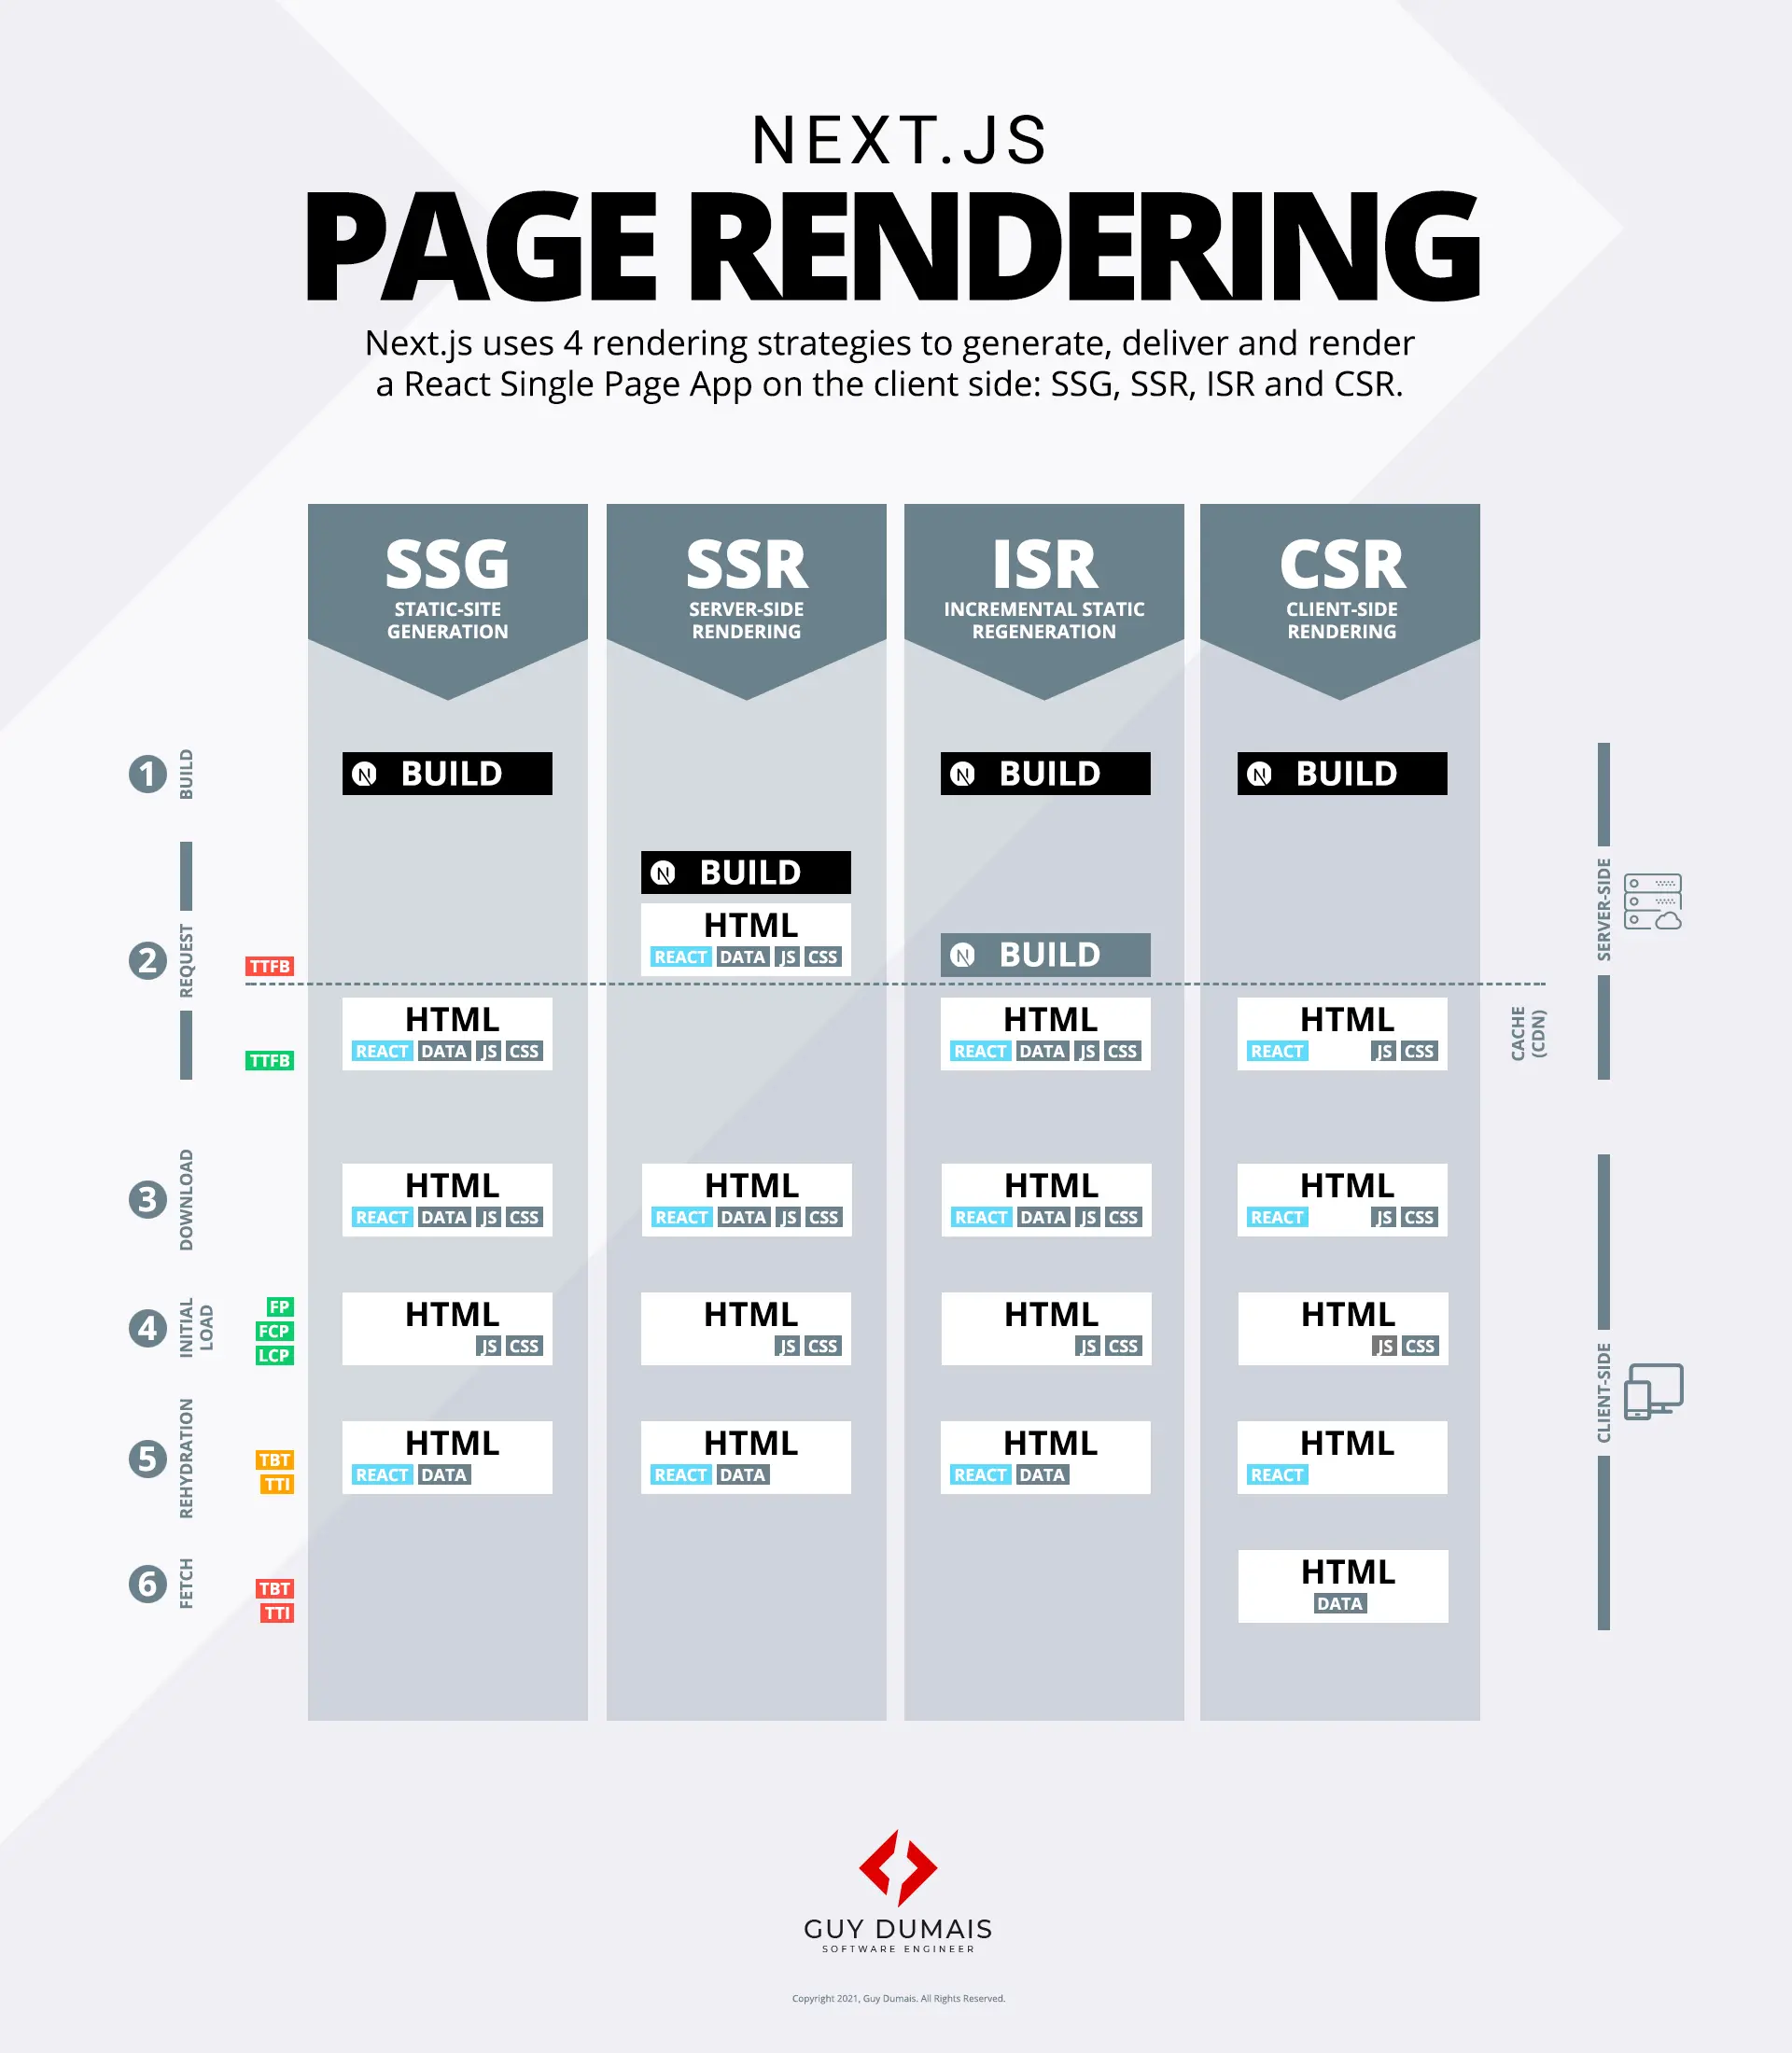 Next.js: The Ultimate Cheat Sheet to Page Rendering [Infographic]